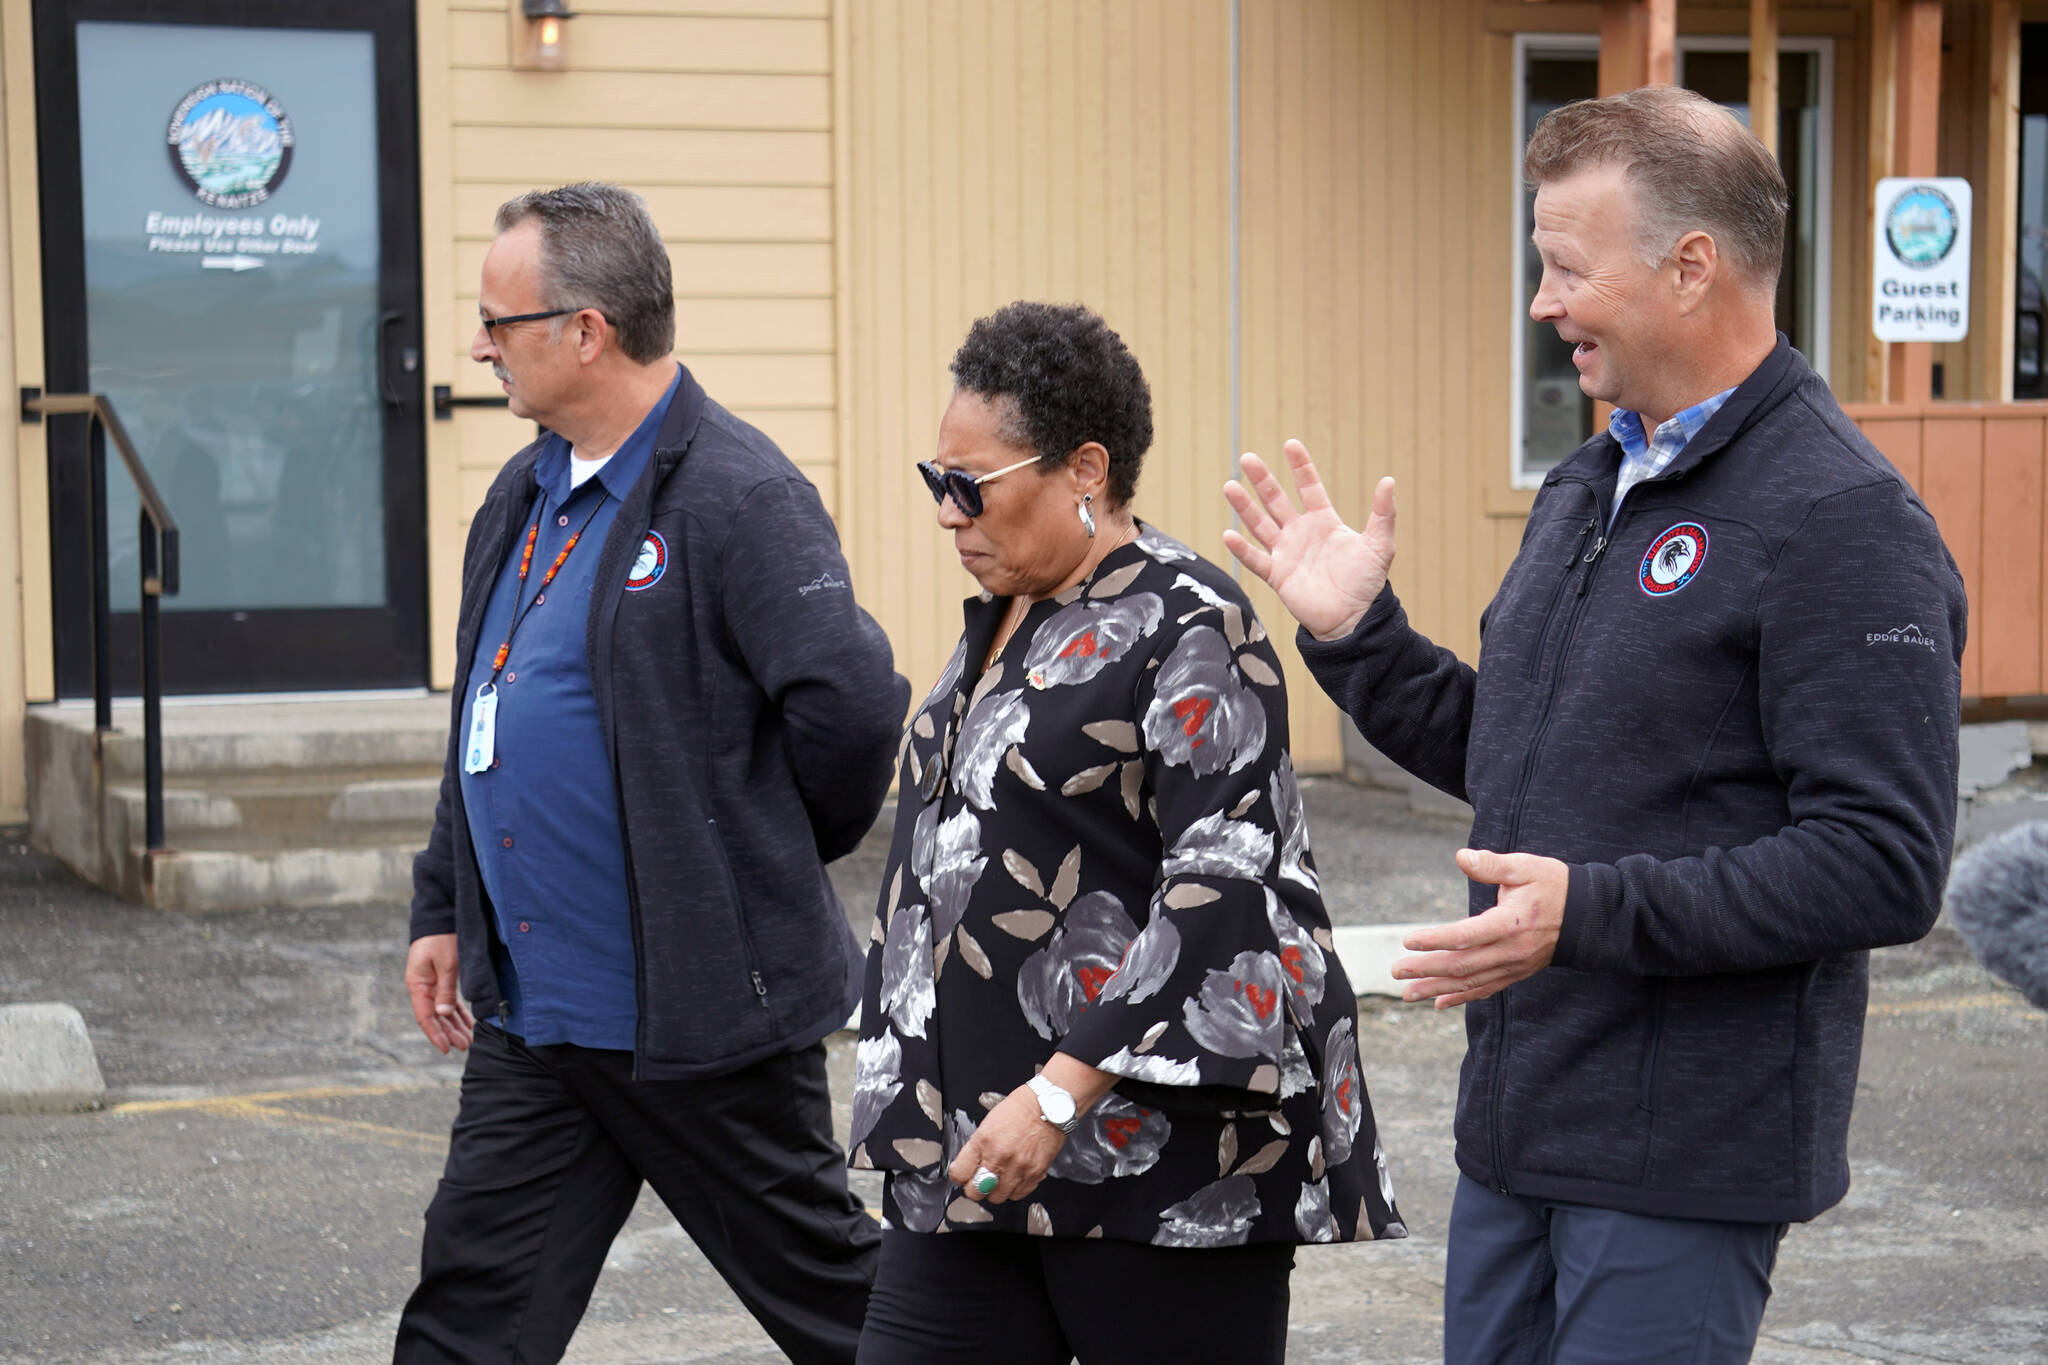 U.S. Department of Housing and Urban Development Secretary Marcia L. Fudge, center, is joined by Kenaitze/Salamatof Tribally Designated Housing Entity Housing and Facilities Director Dale Segura and Chair Kaarlo Wik on a tour of the Kahtnuht’ana Qayeh in Kenai, Alaska, on Wednesday, Aug. 30, 2023. (Jake Dye/Peninsula Clarion)